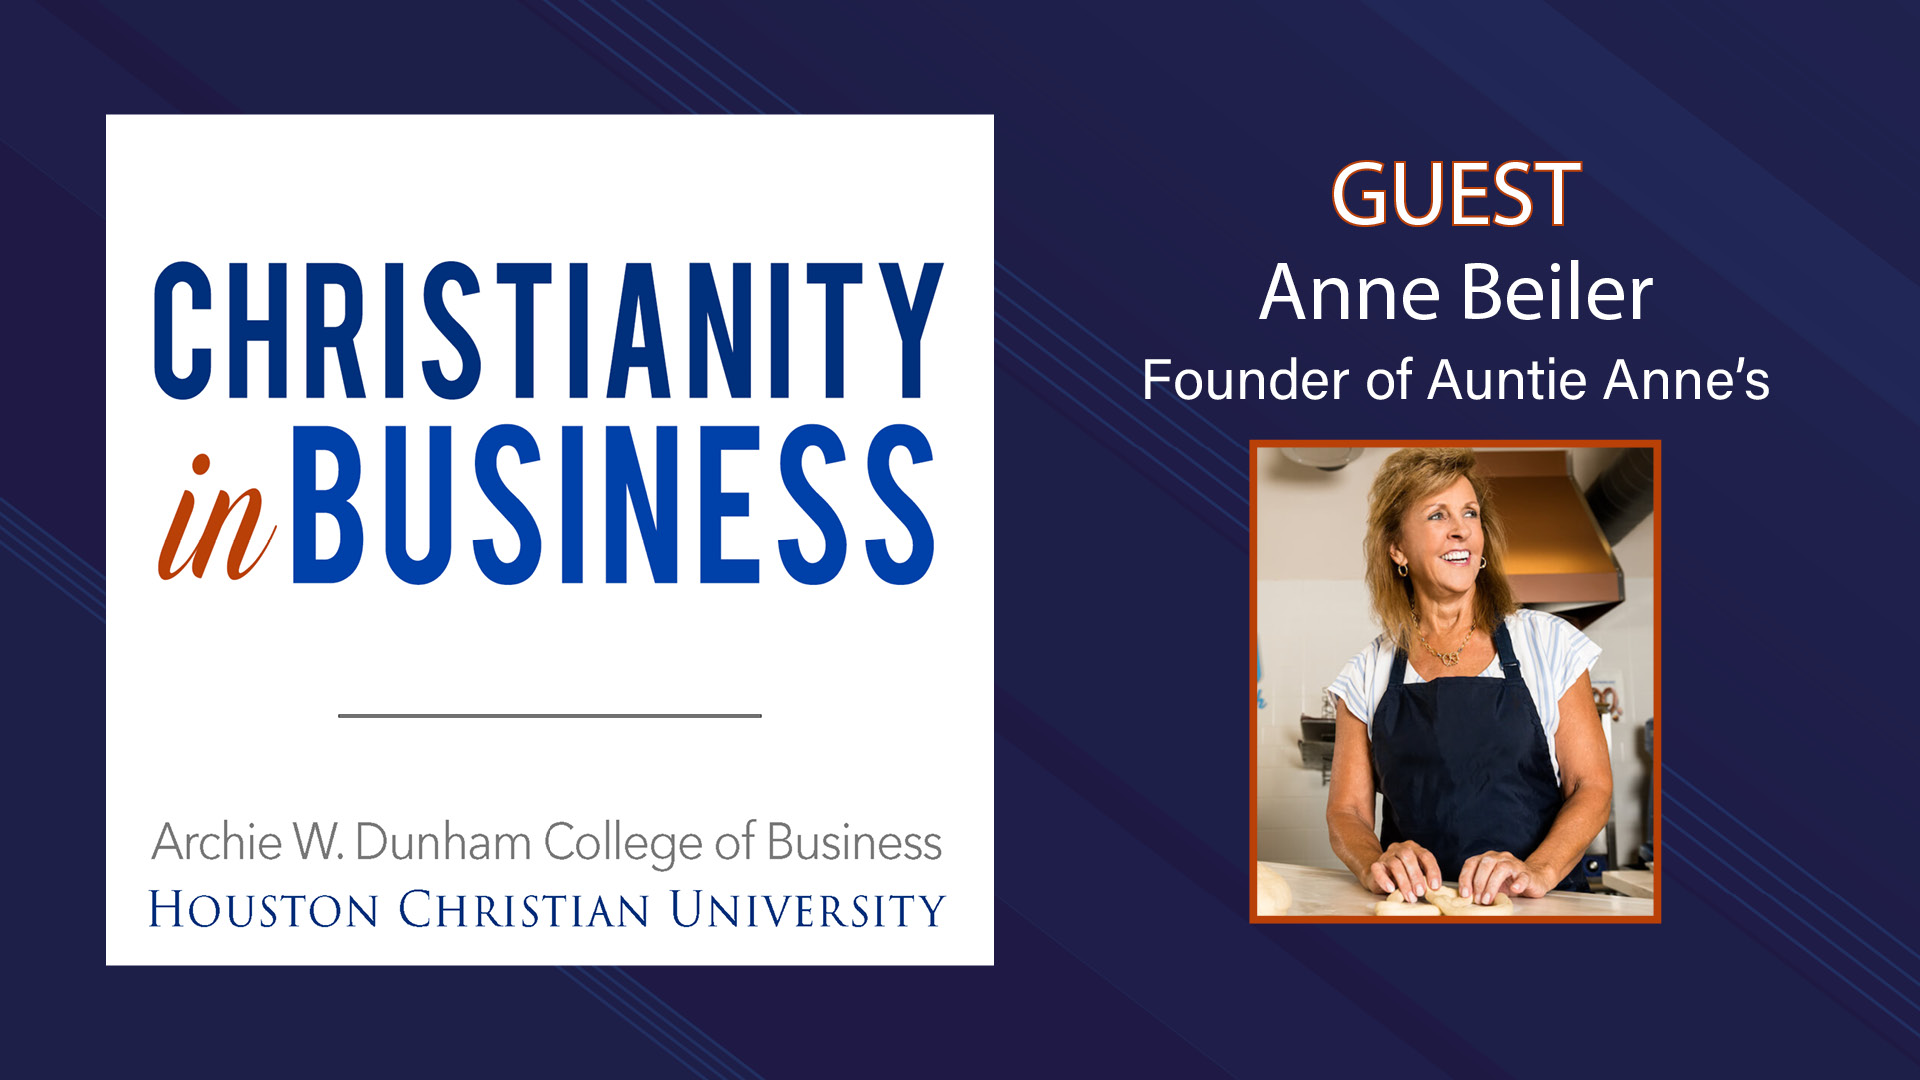 Anne Beiler, founder of Auntie Anne's, joins as a guest on the Christianity in Business podcast.